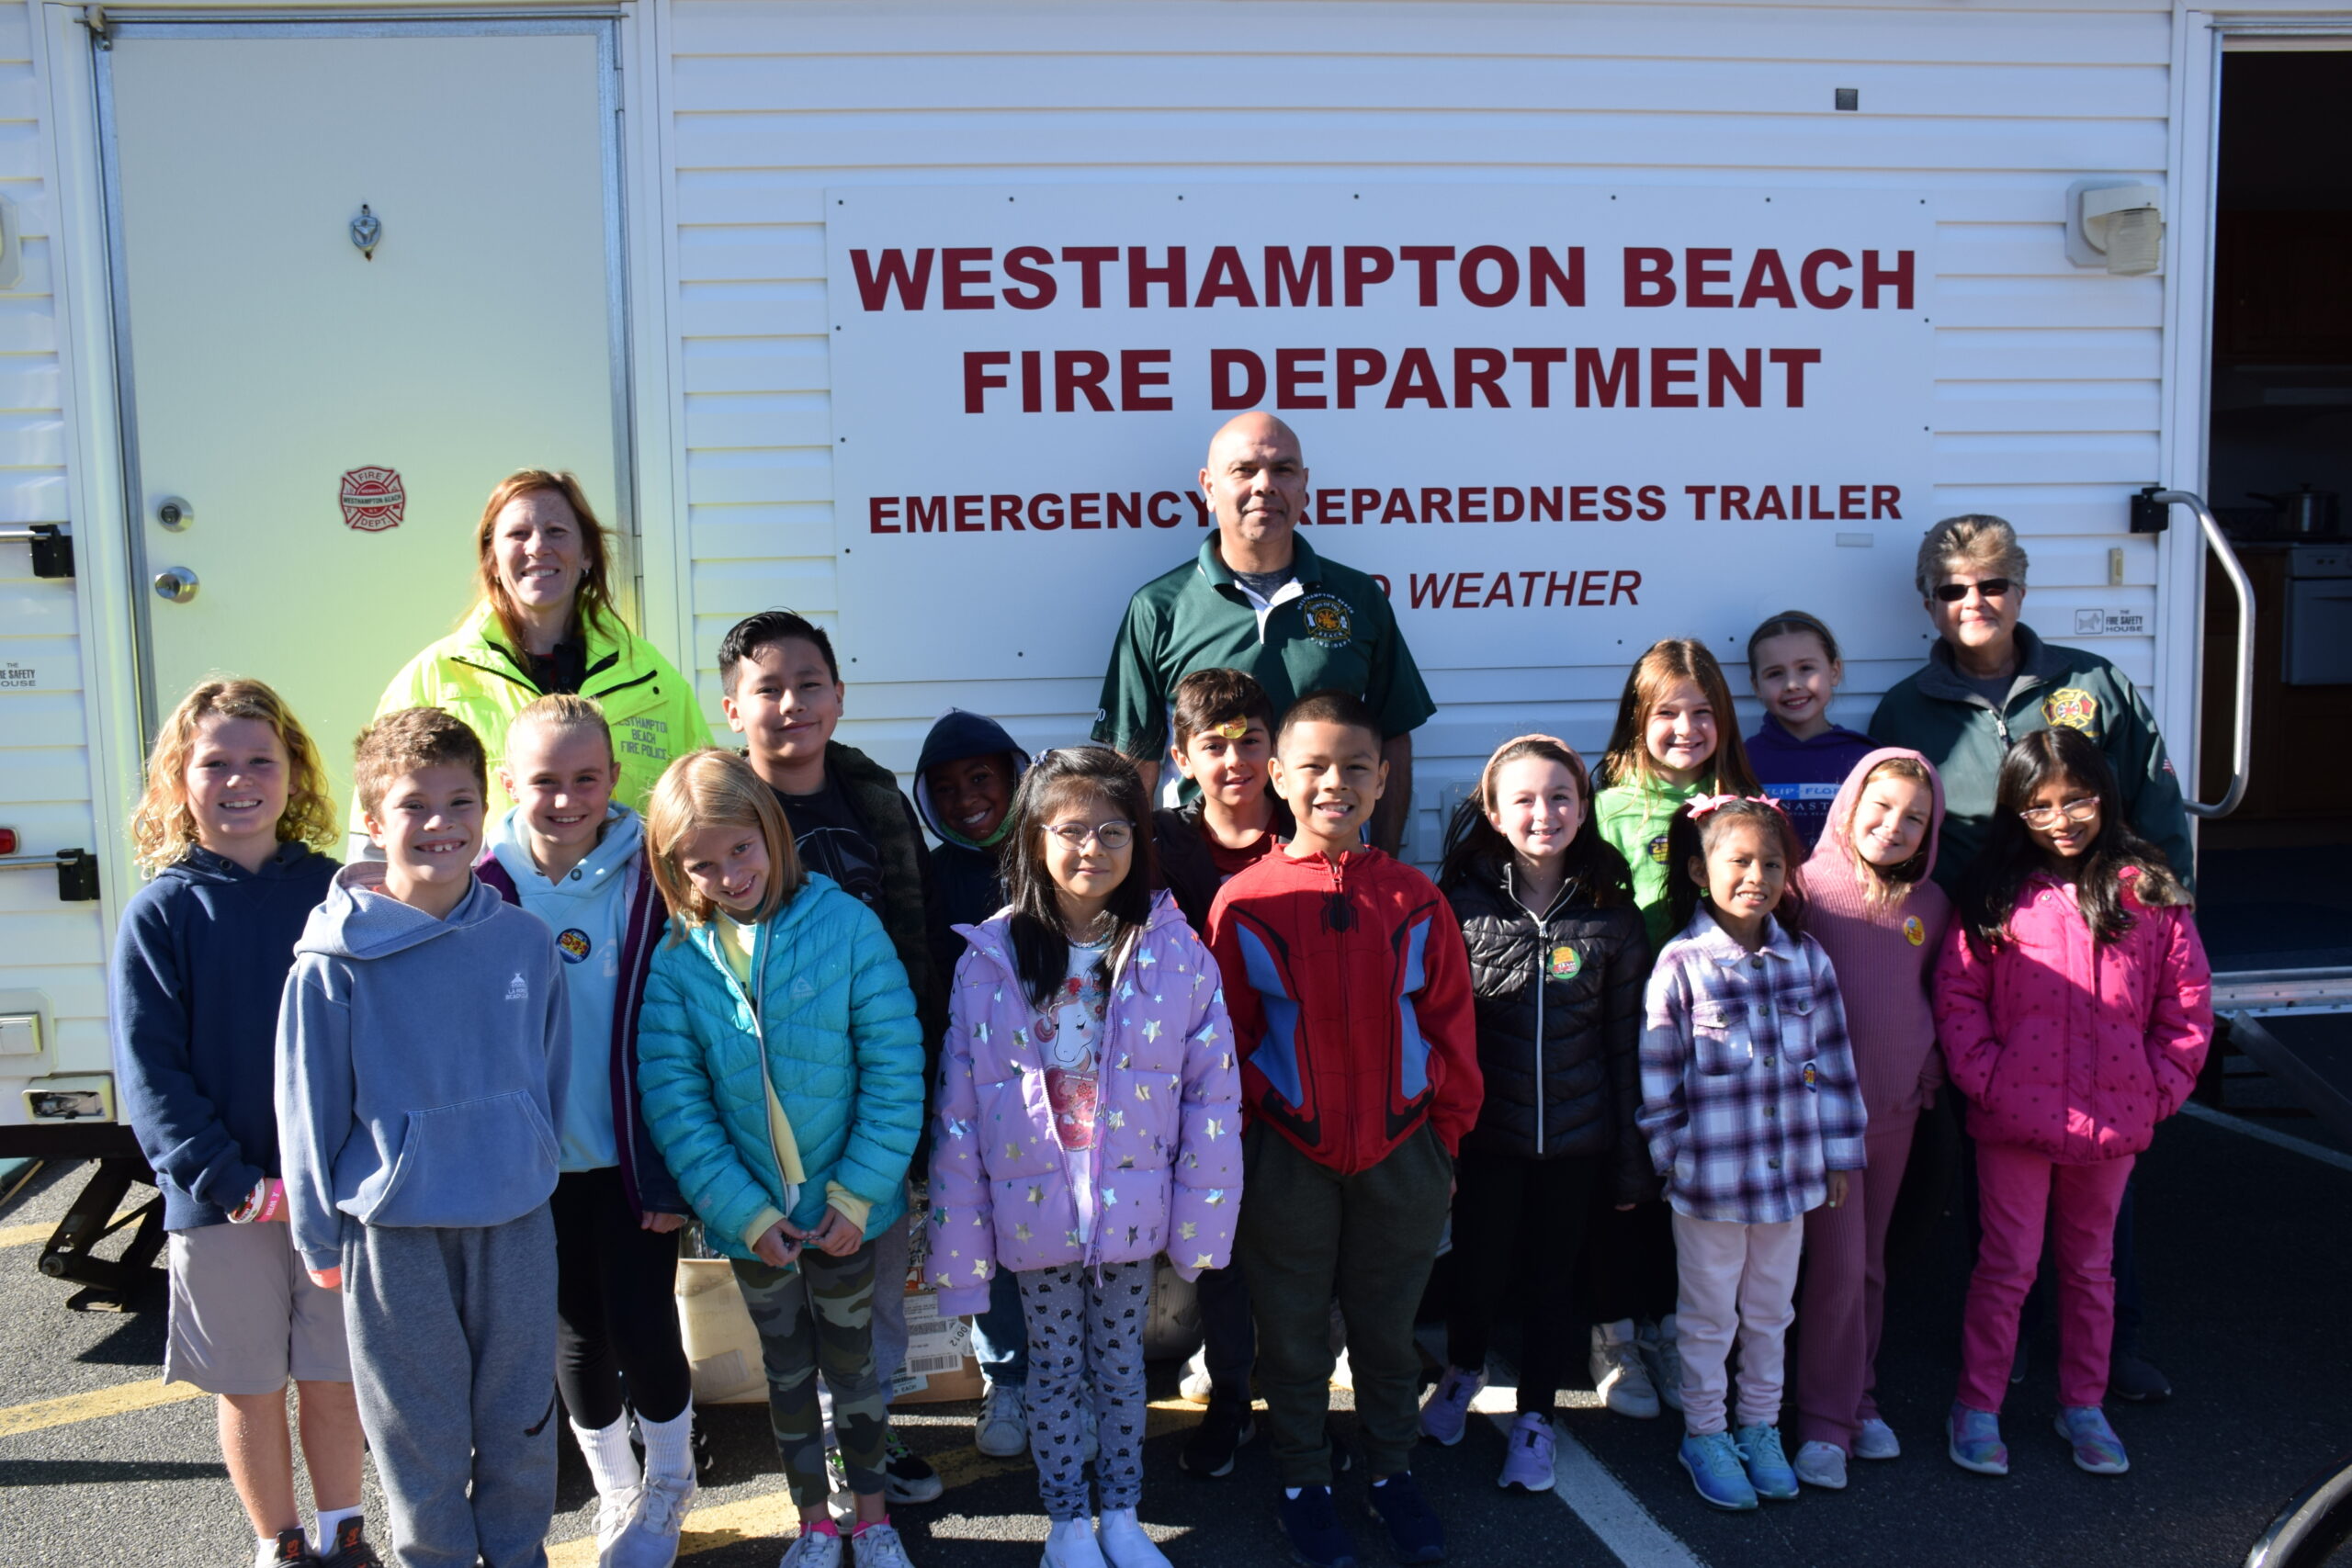 As part of Fire Prevention Week, Westhampton Beach Elementary School students participated in fire safety lessons with members of the Westhampton Beach Fire Department. Students learned about general fire safety, smoke alarms and fire extinguishers and practiced calling 911 and jumping out the window of the fire
department’s smoke house simulator.